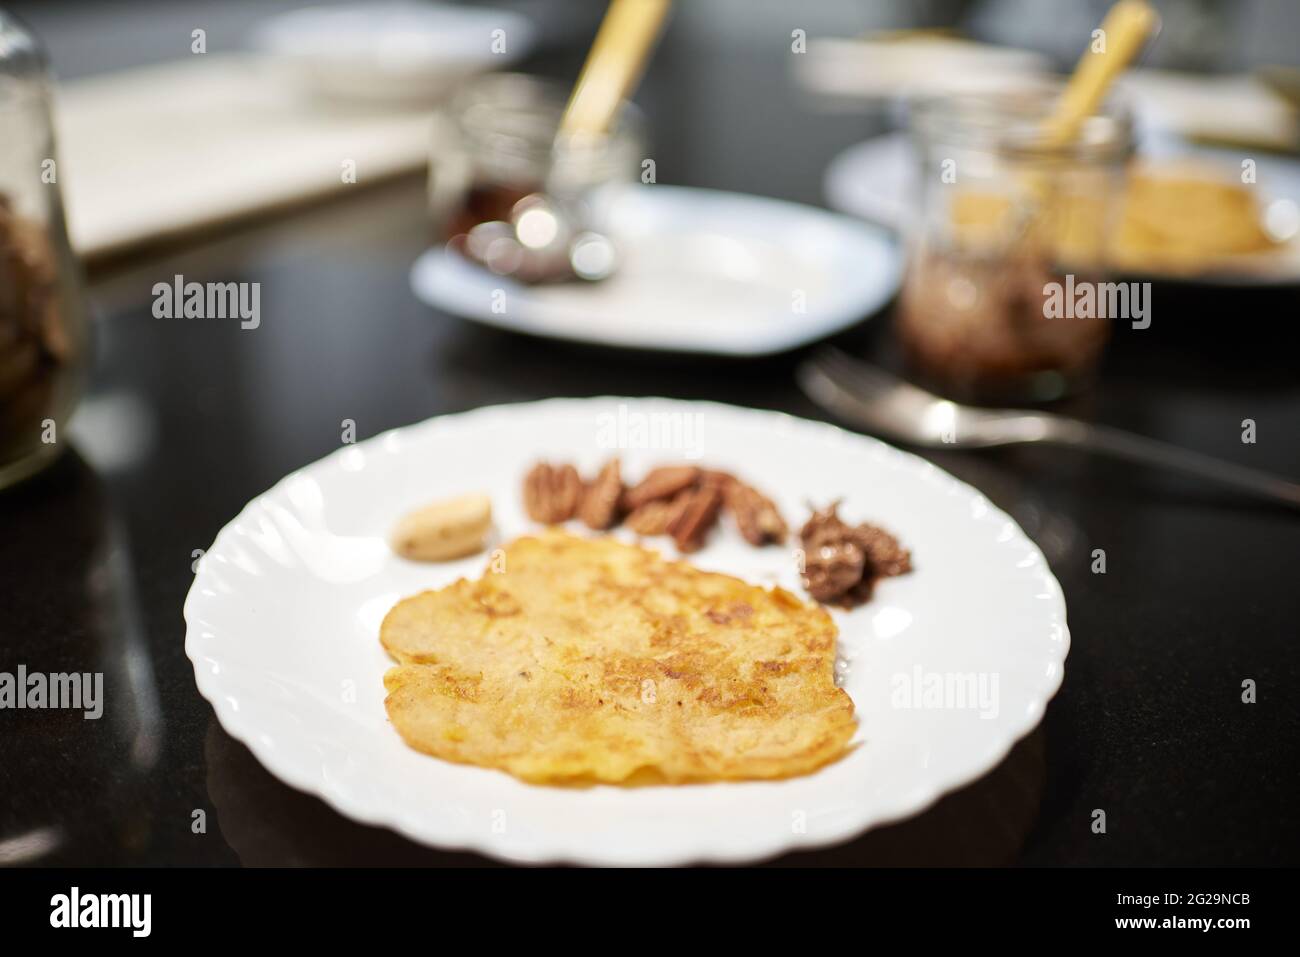 Photography oh a banana pancake in a white plate Stock Photo